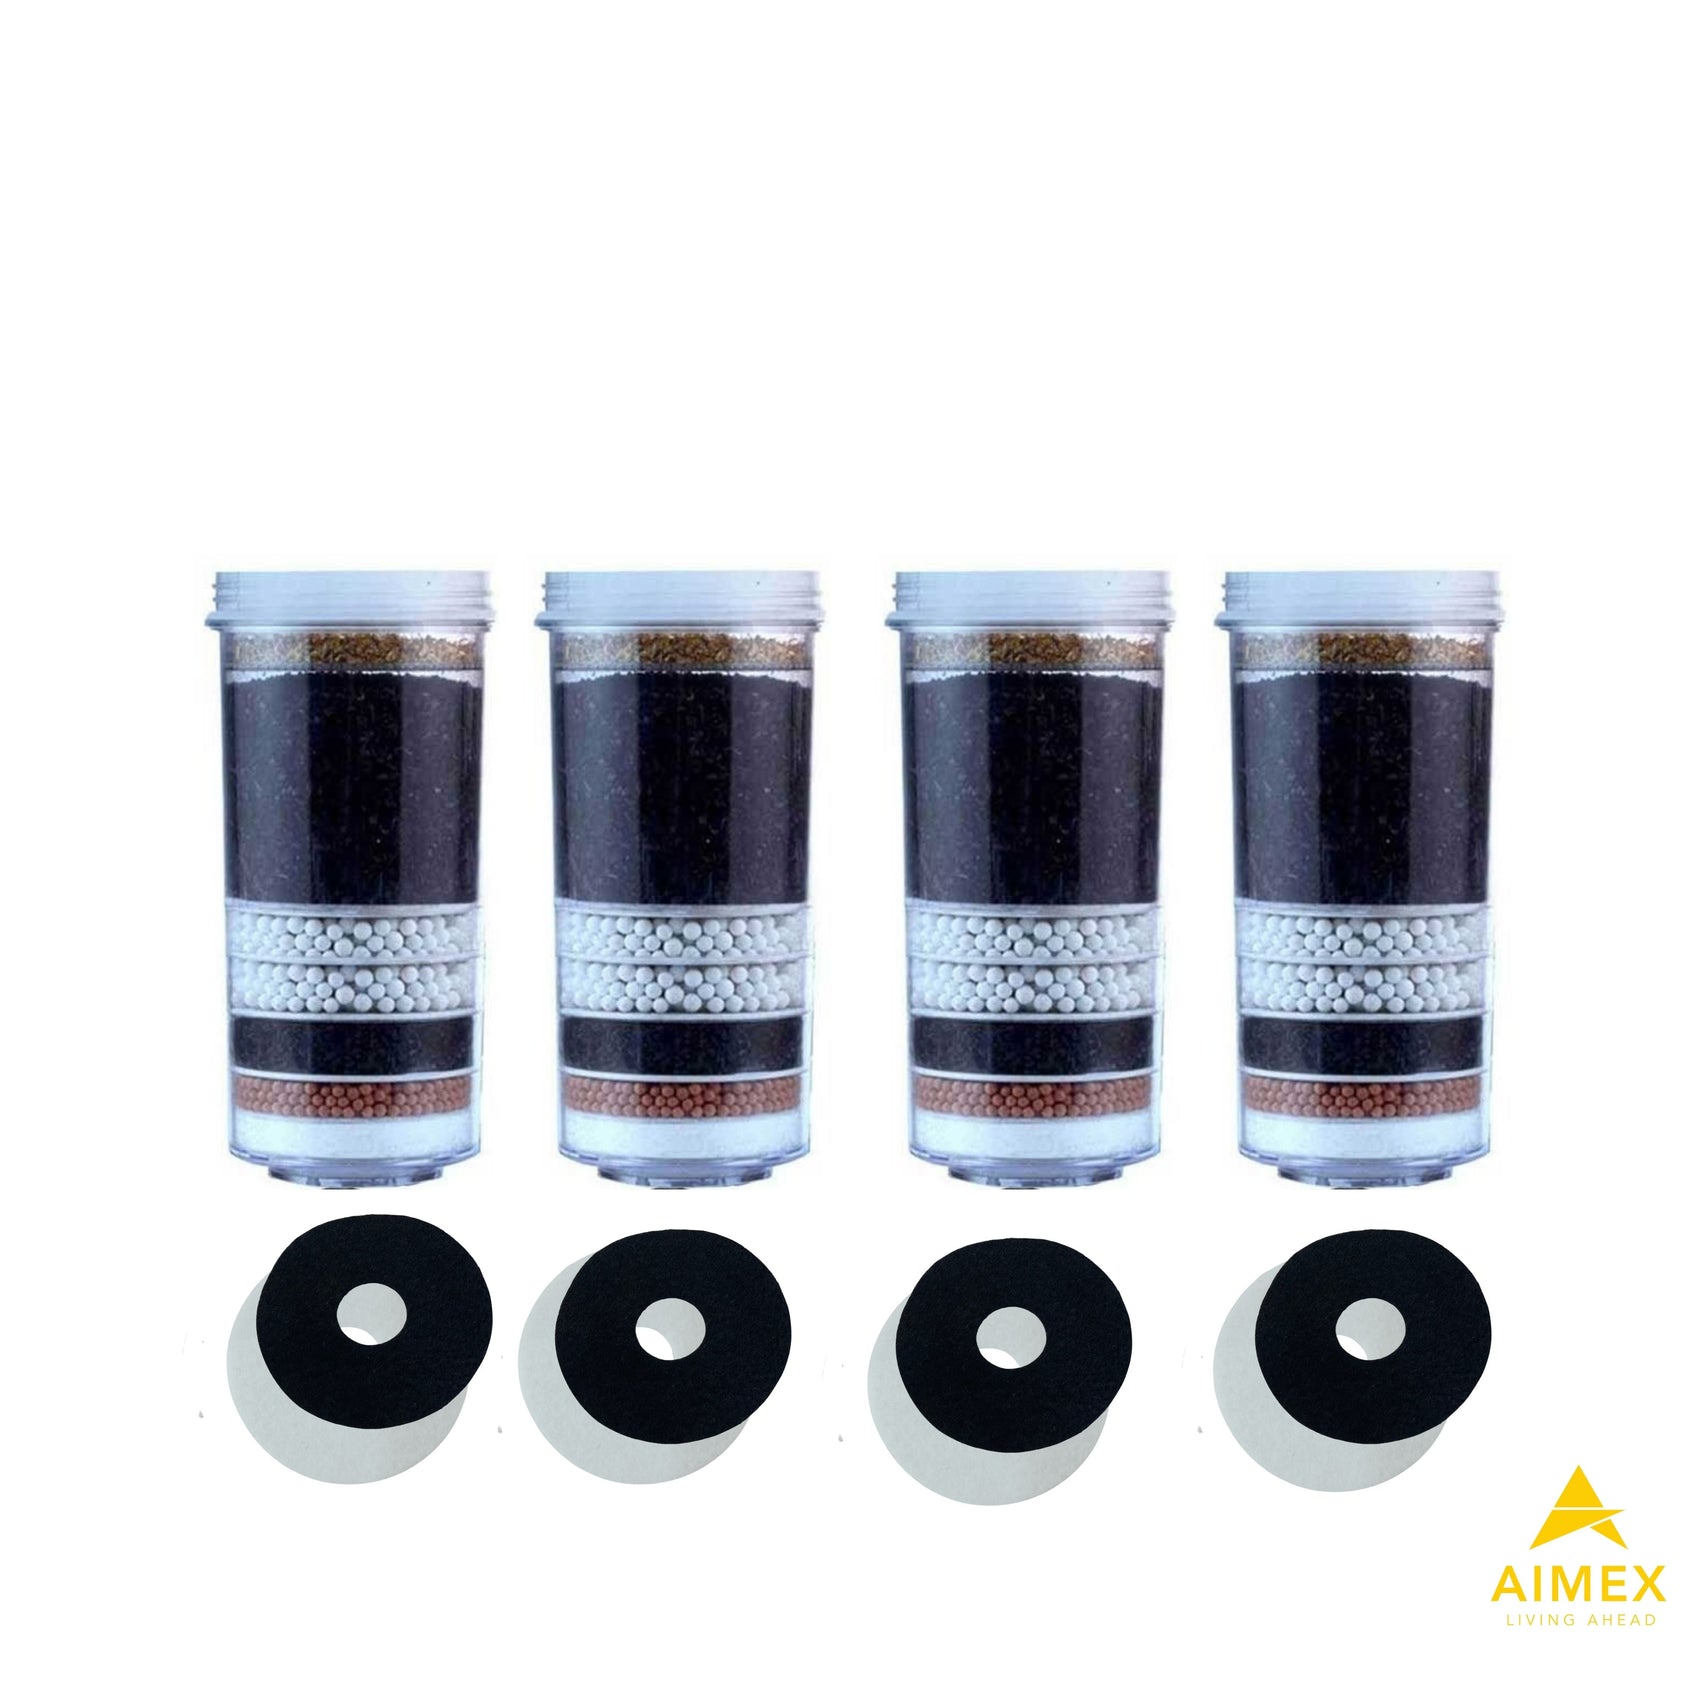 Aimex 8 Stage Water AA Filter Cartridges x 4